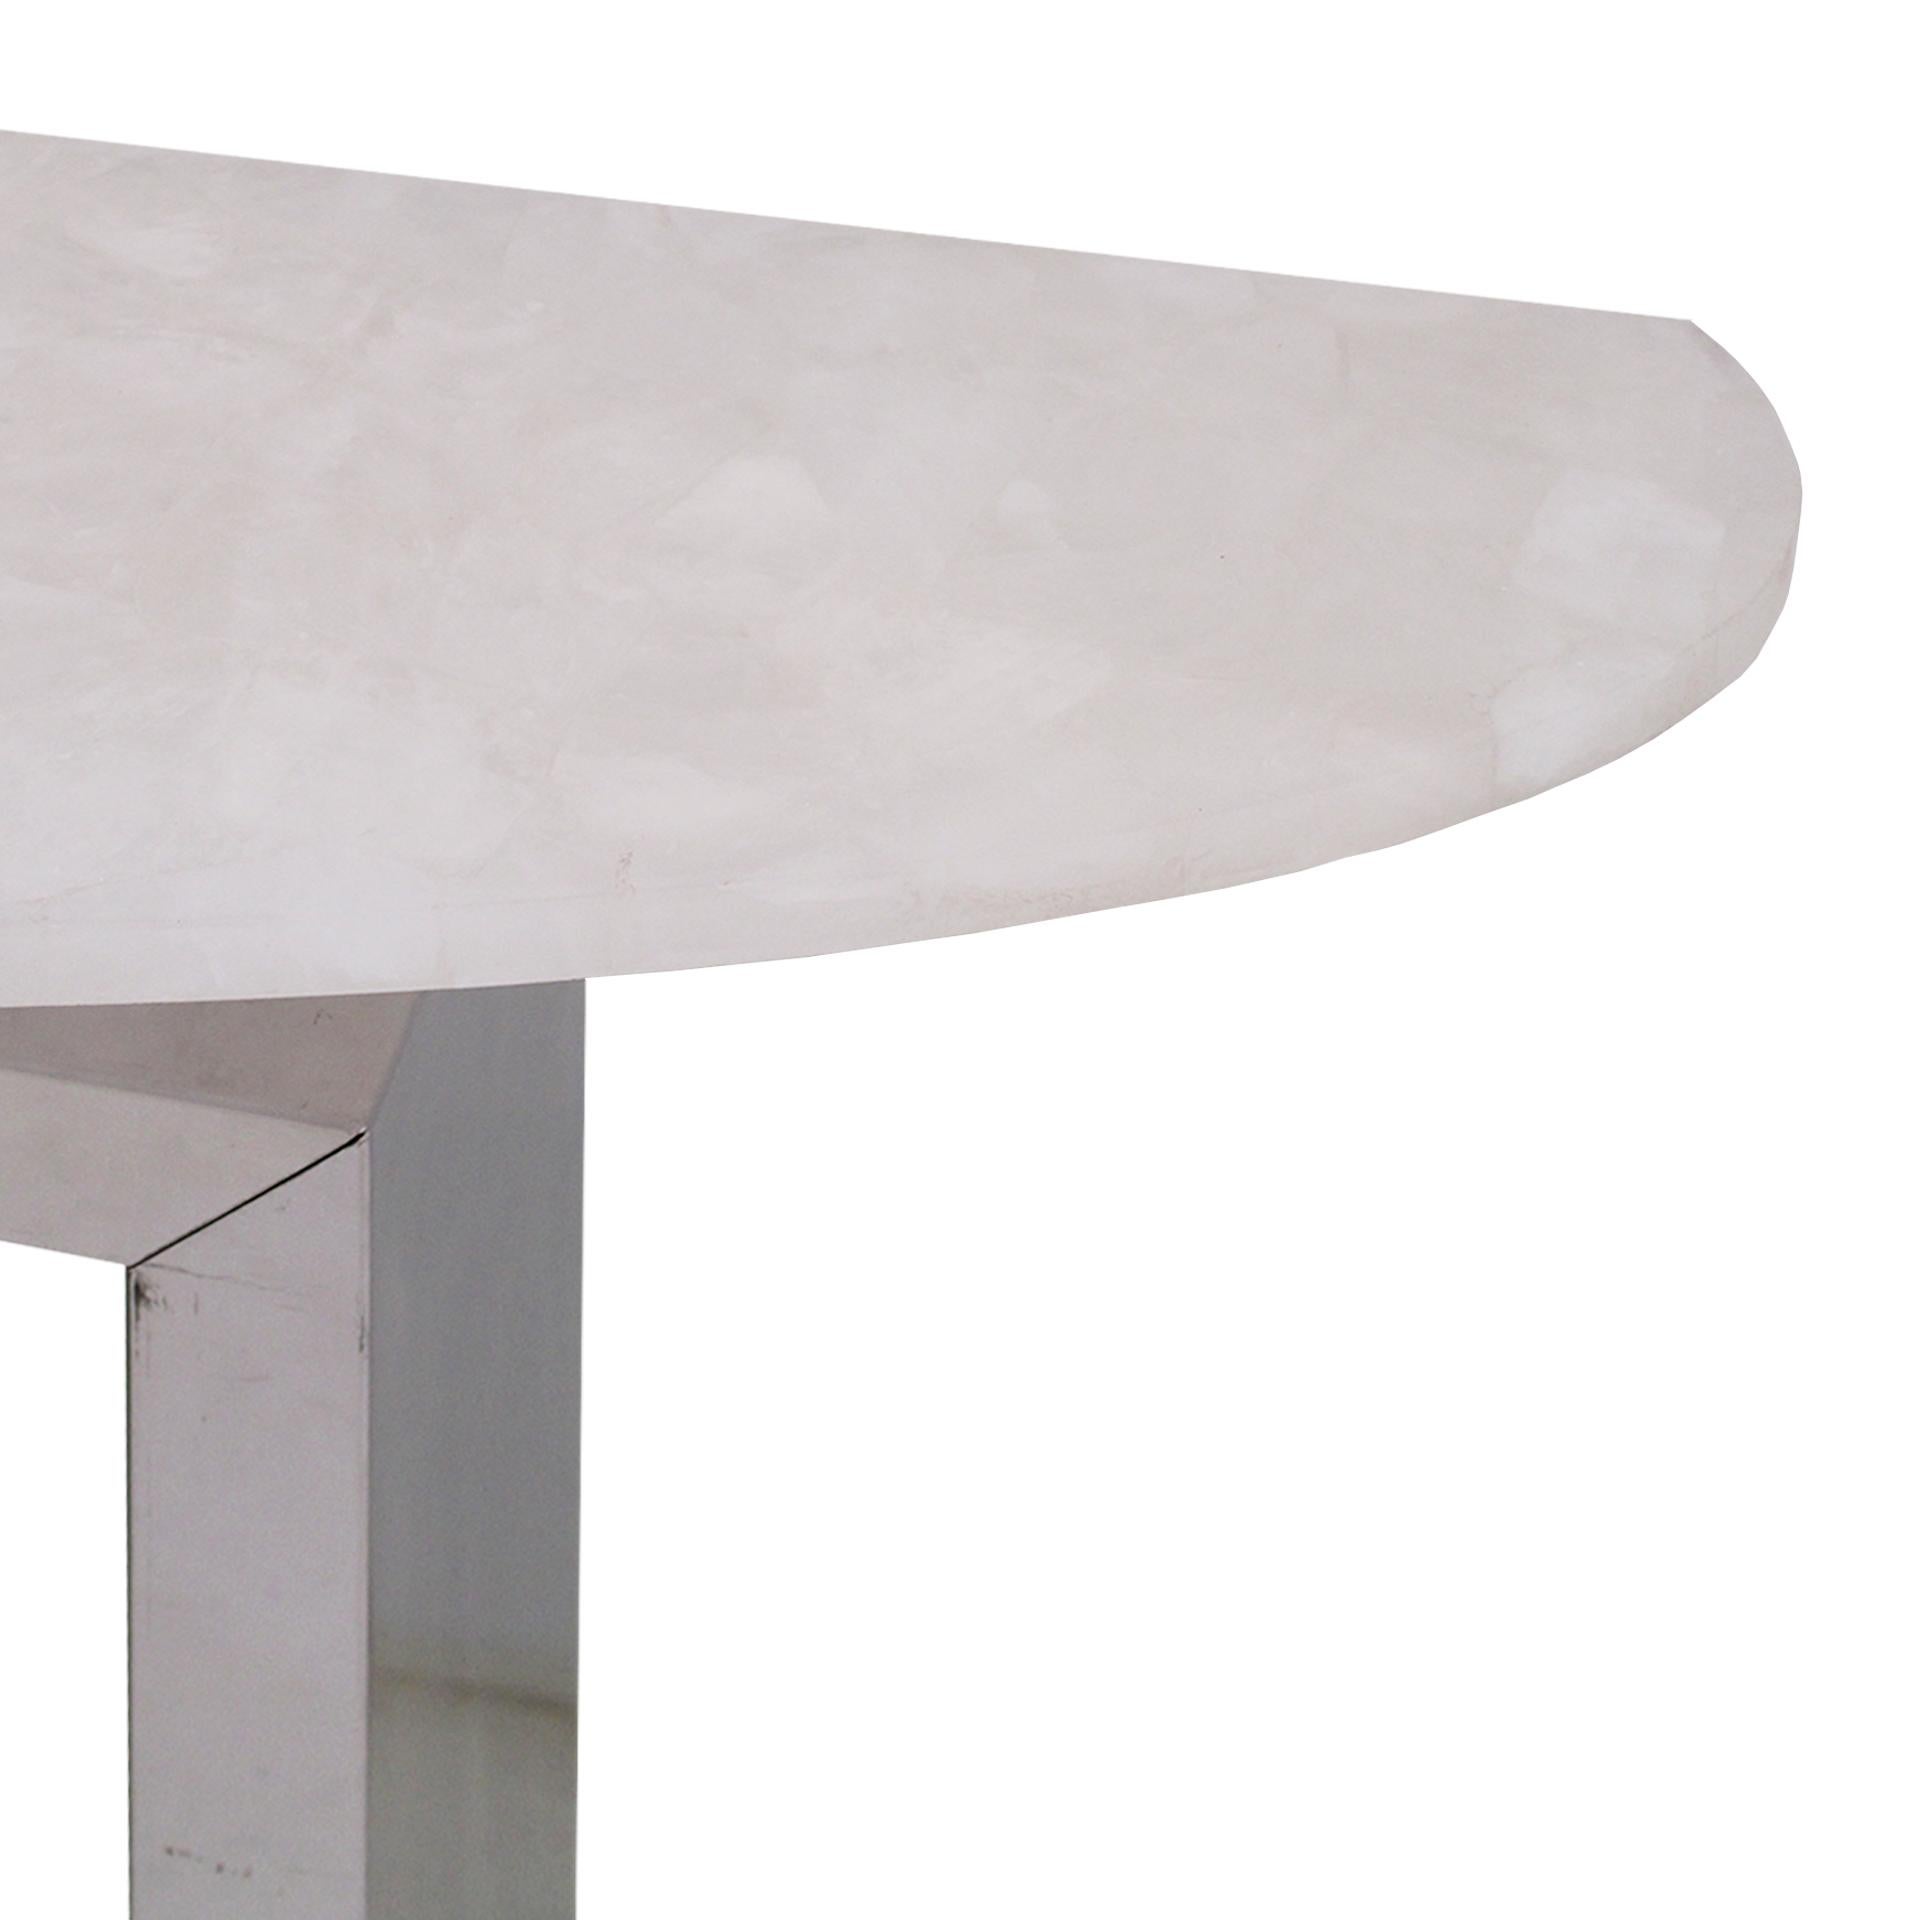 Contemporary Italian Demilune Console Table Made of White Quartz and Steel base In Good Condition For Sale In Madrid, ES